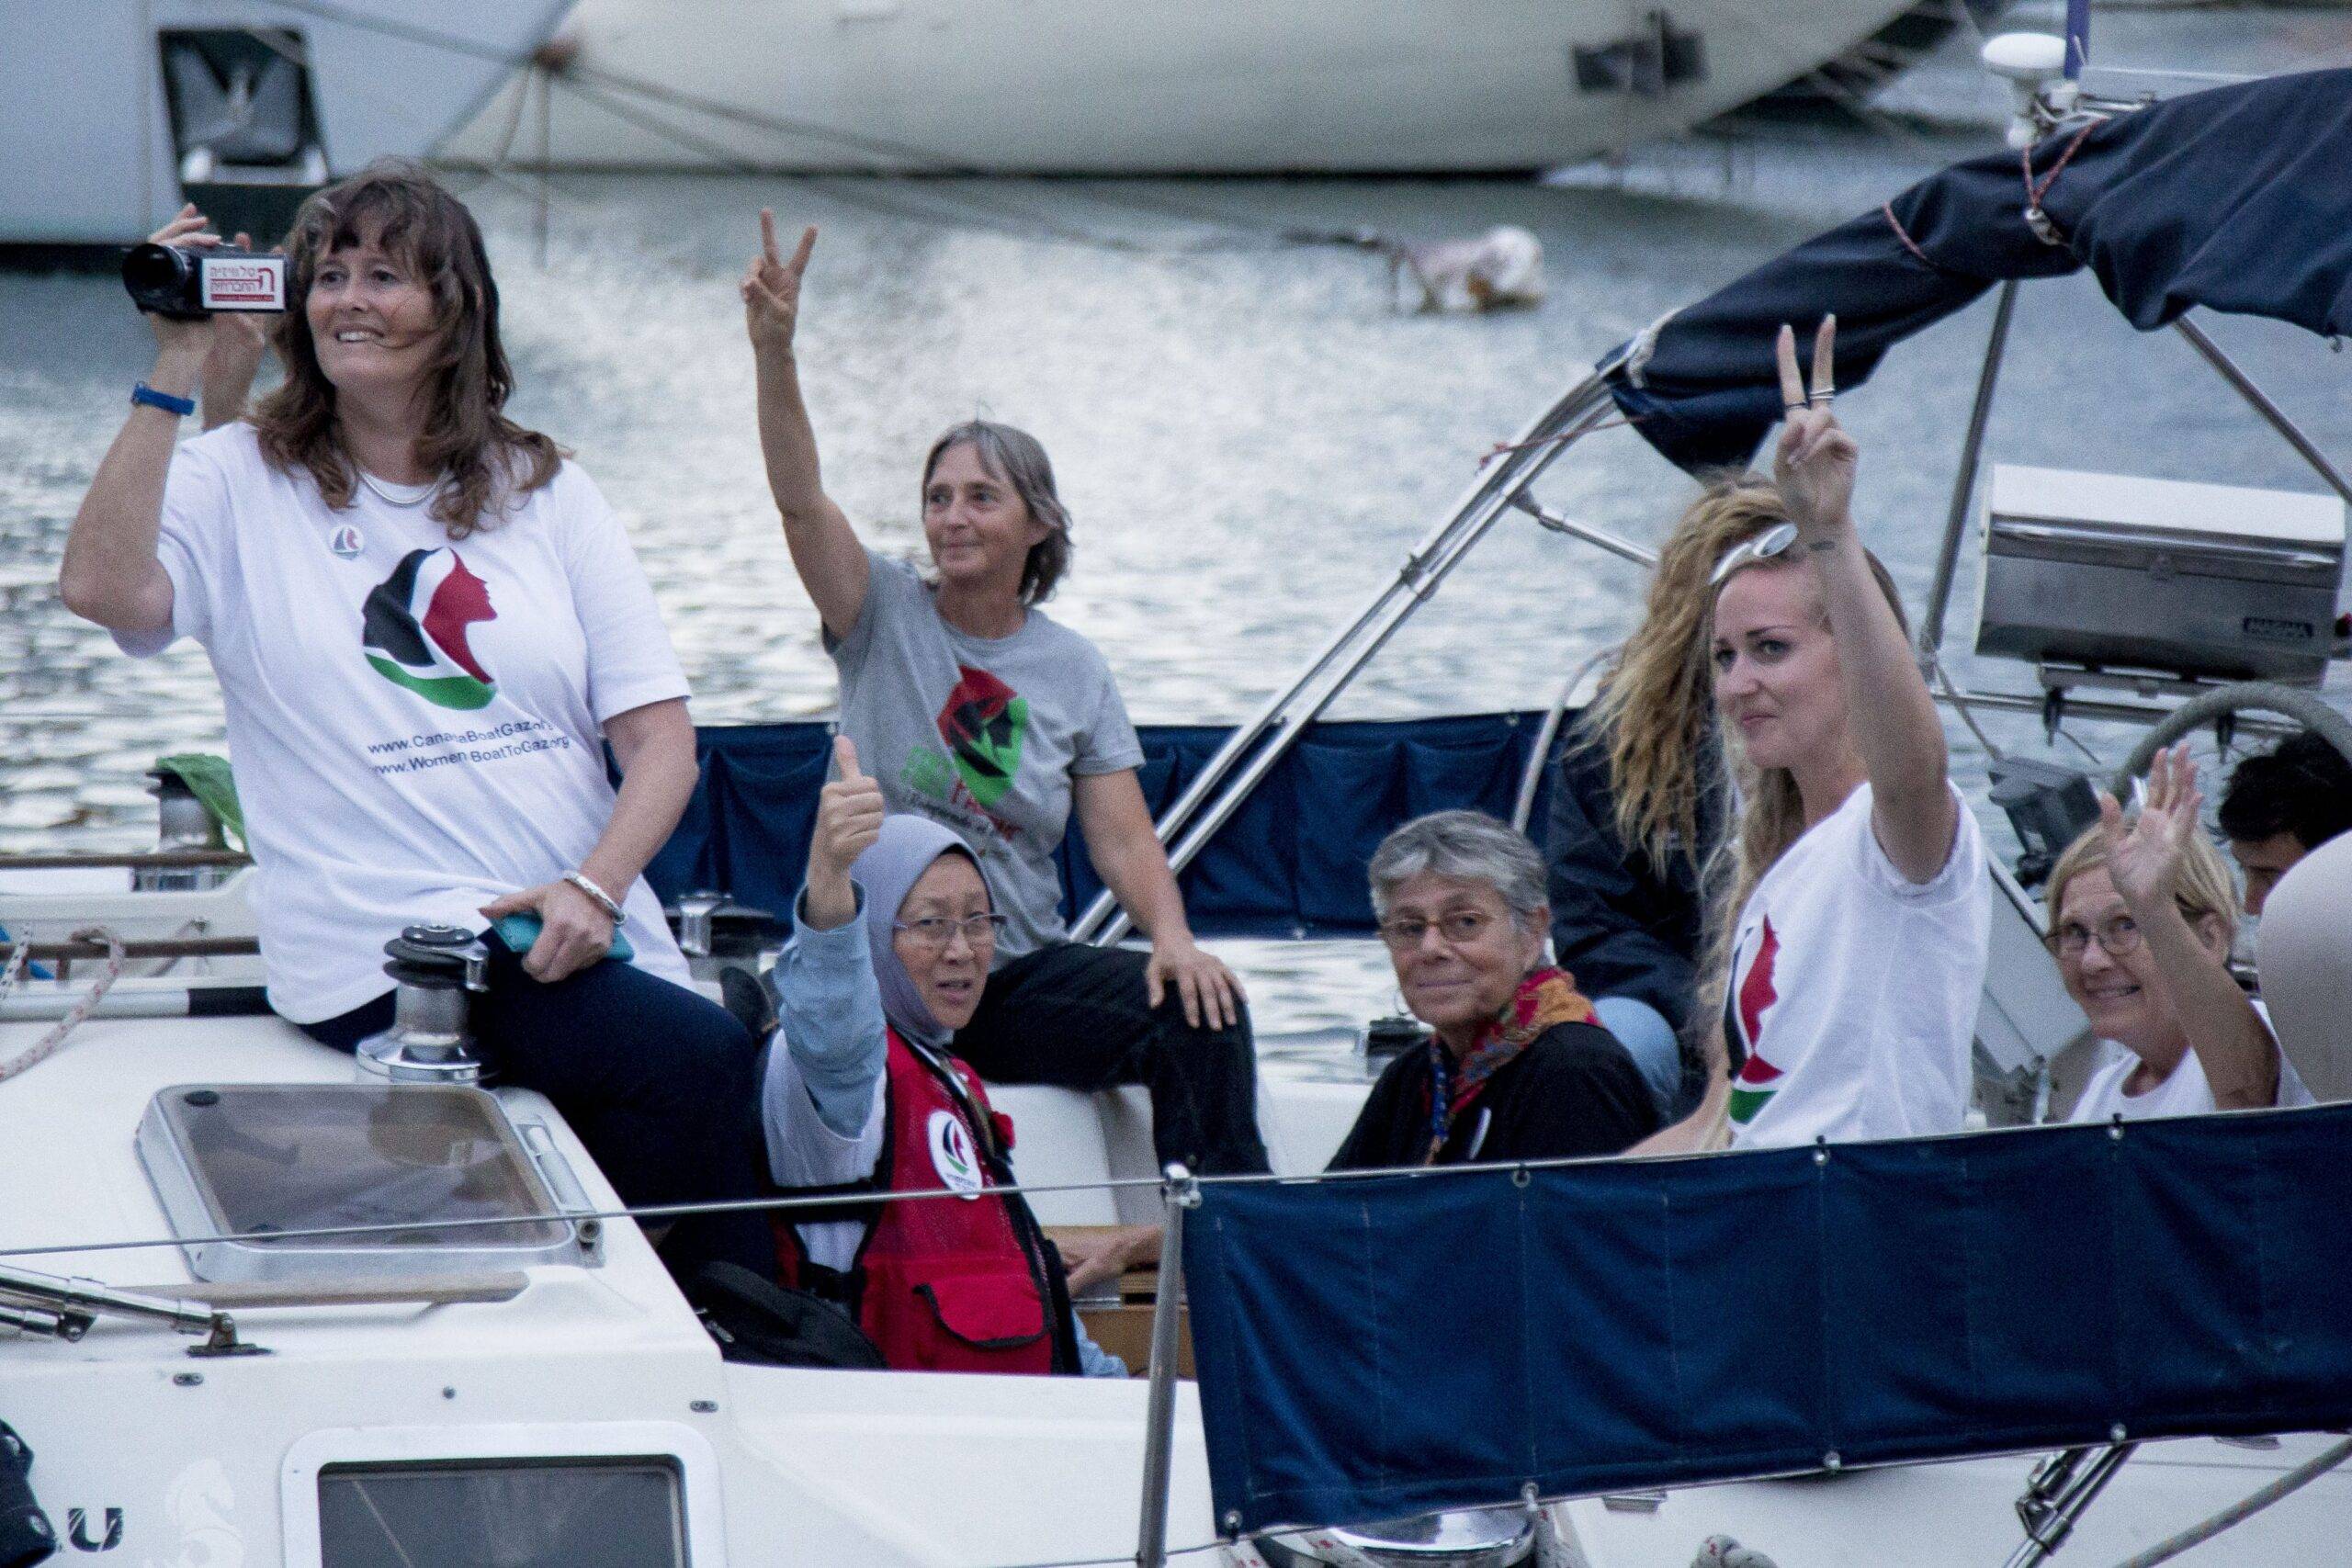 Activists of Two sailing boats, Amal-Hope and Zaytouna-Oliva, with only female activists on board, make preparations before set off for the Gaza Strip from the port of Barcelona under the banner "The Women's Boat to Gaza" to break the Israeli blockade on Gaza on 14 September, 2016 in Barcelona, Spain [Albert Llop/Anadolu Agency]